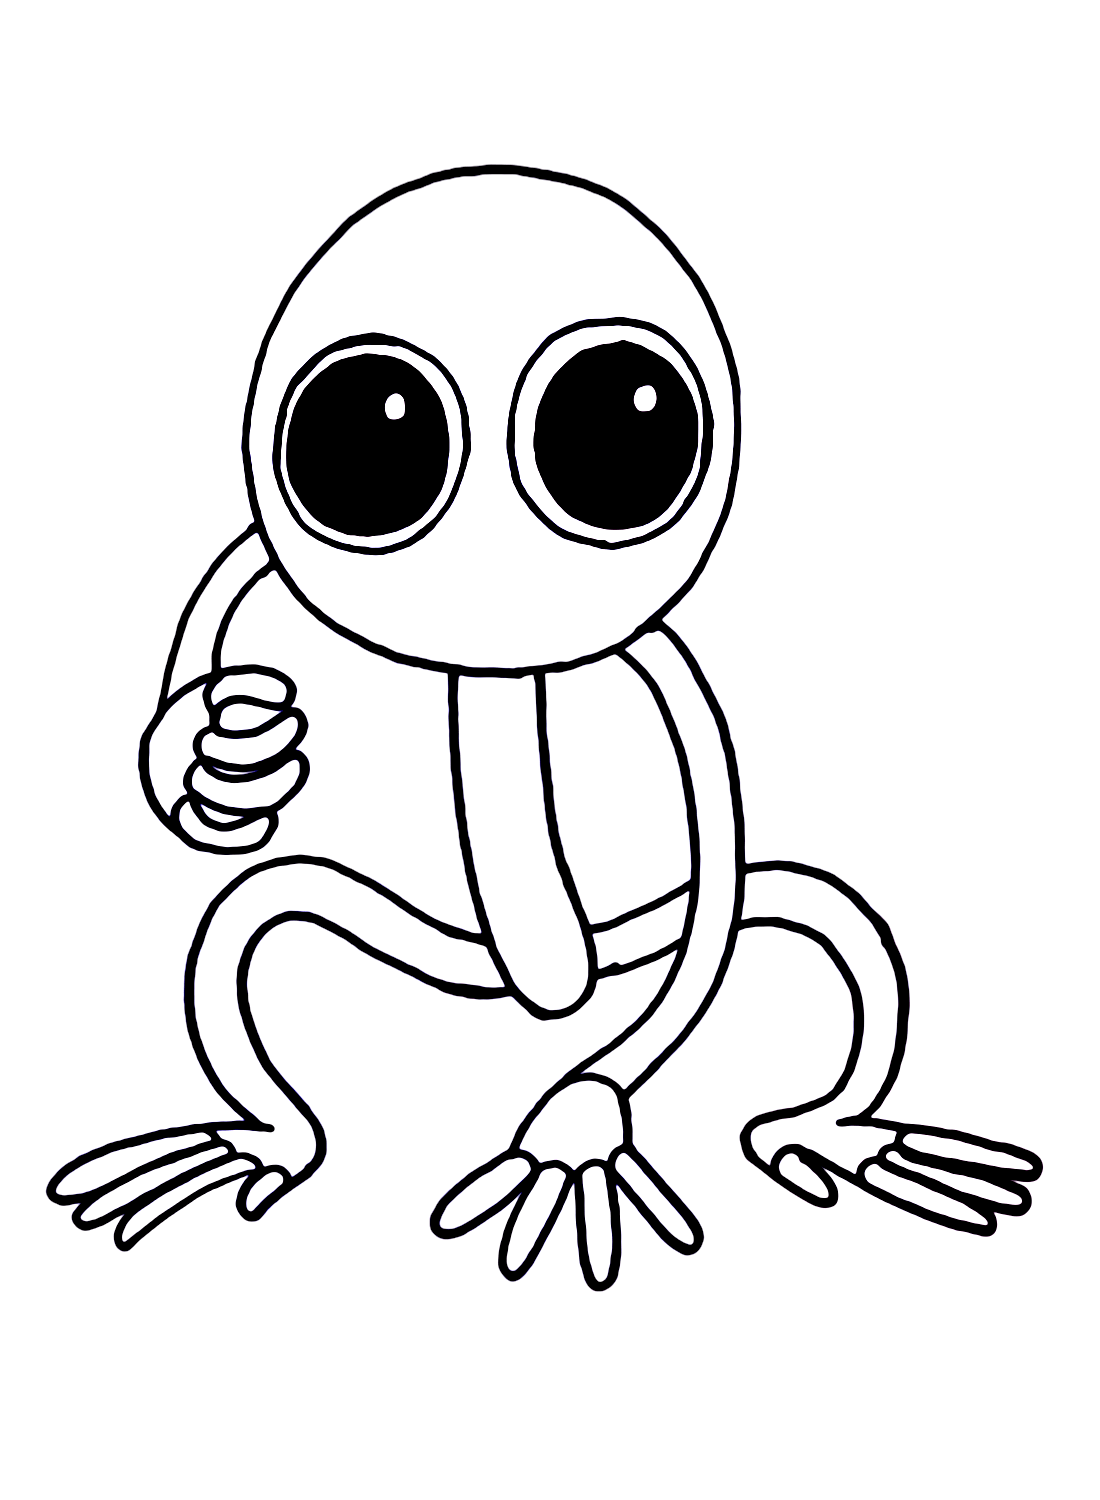 Purple Rainbow Friends Coloring Pages